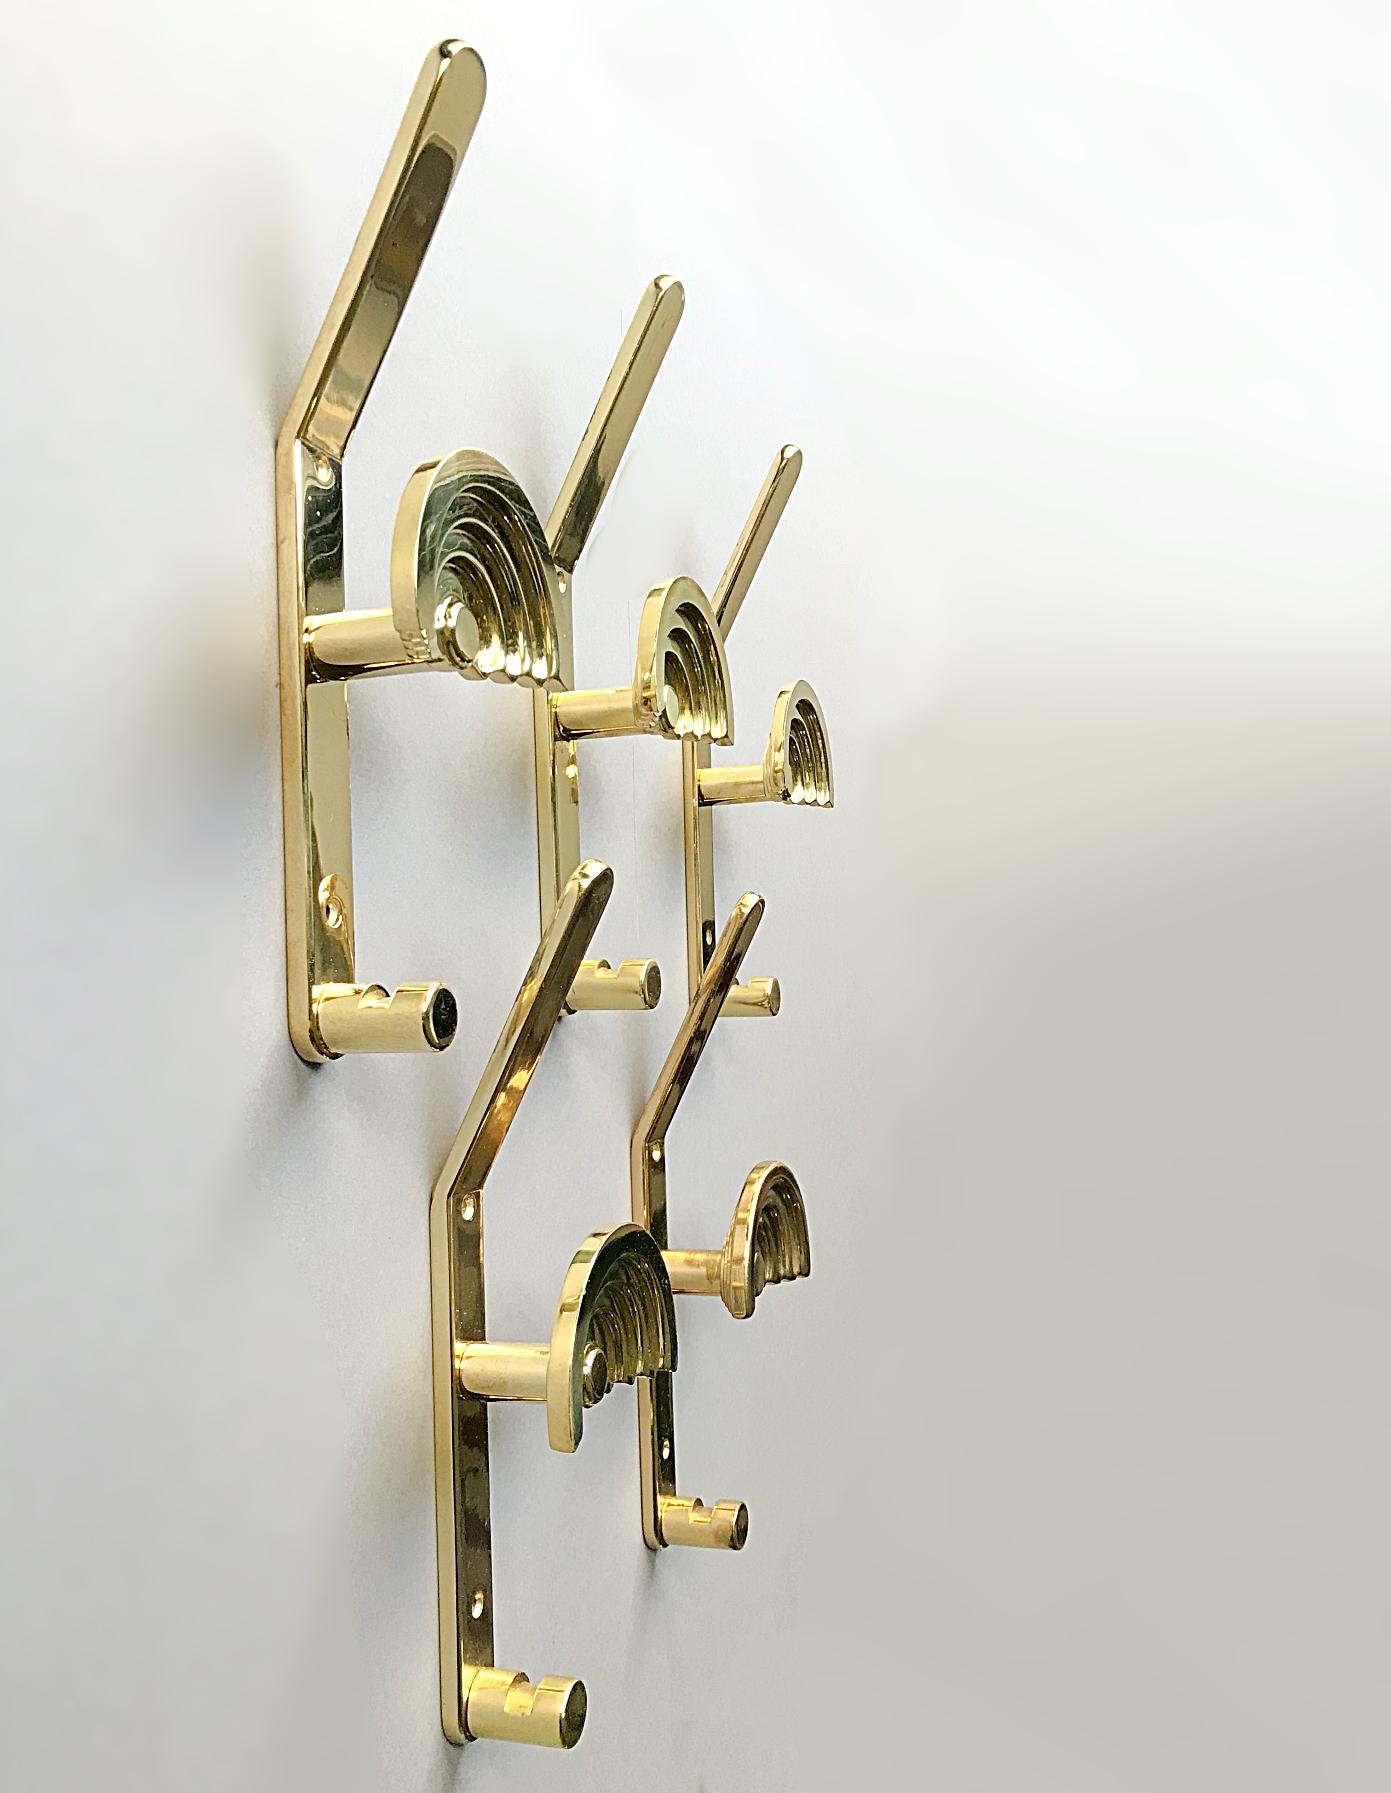 Beautiful and very rare Italian solid brass Quattro SE hooks designed by Ettore Sottsass for Valli & Valli in 1980s. In very nice vintage condition.

Measures: H 9.85 in. x W 3.35 in. x D 2.17 in
H 25 cm x W 8.5 cm x D 5.5 cm.